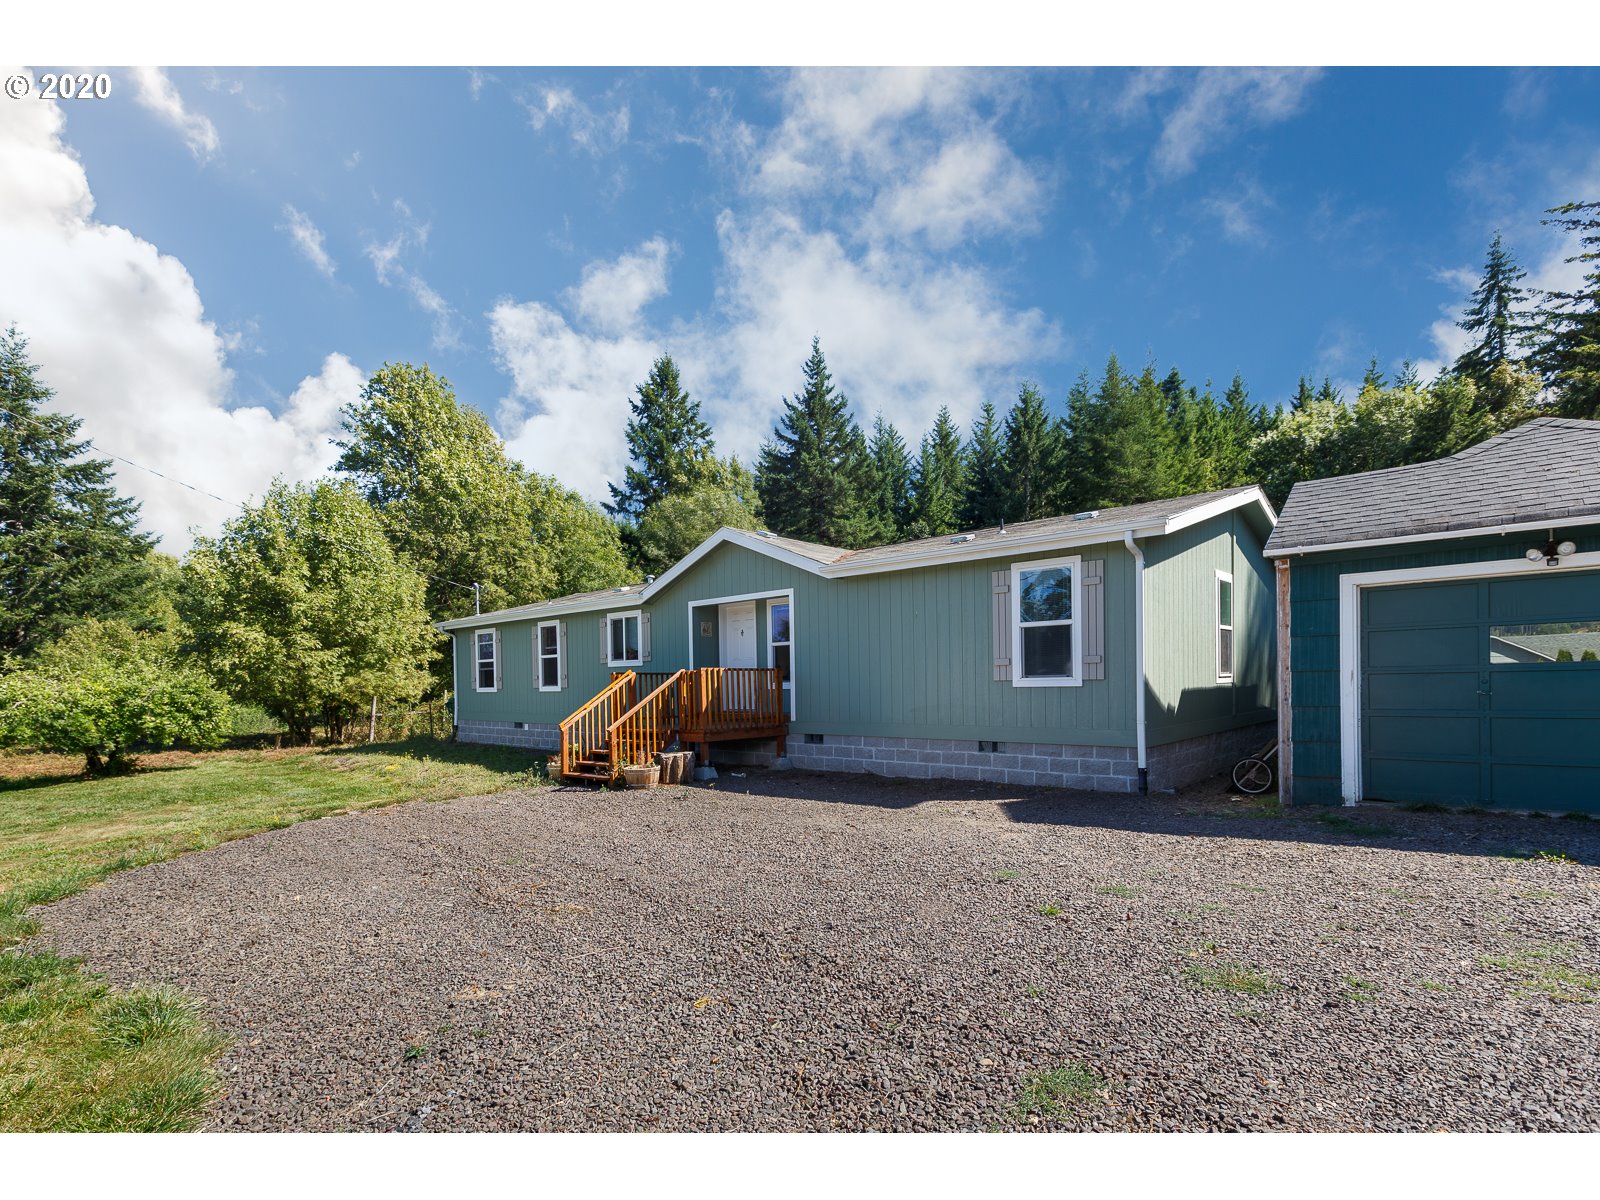 30460 SALMON RIVER HWY (1 of 23)